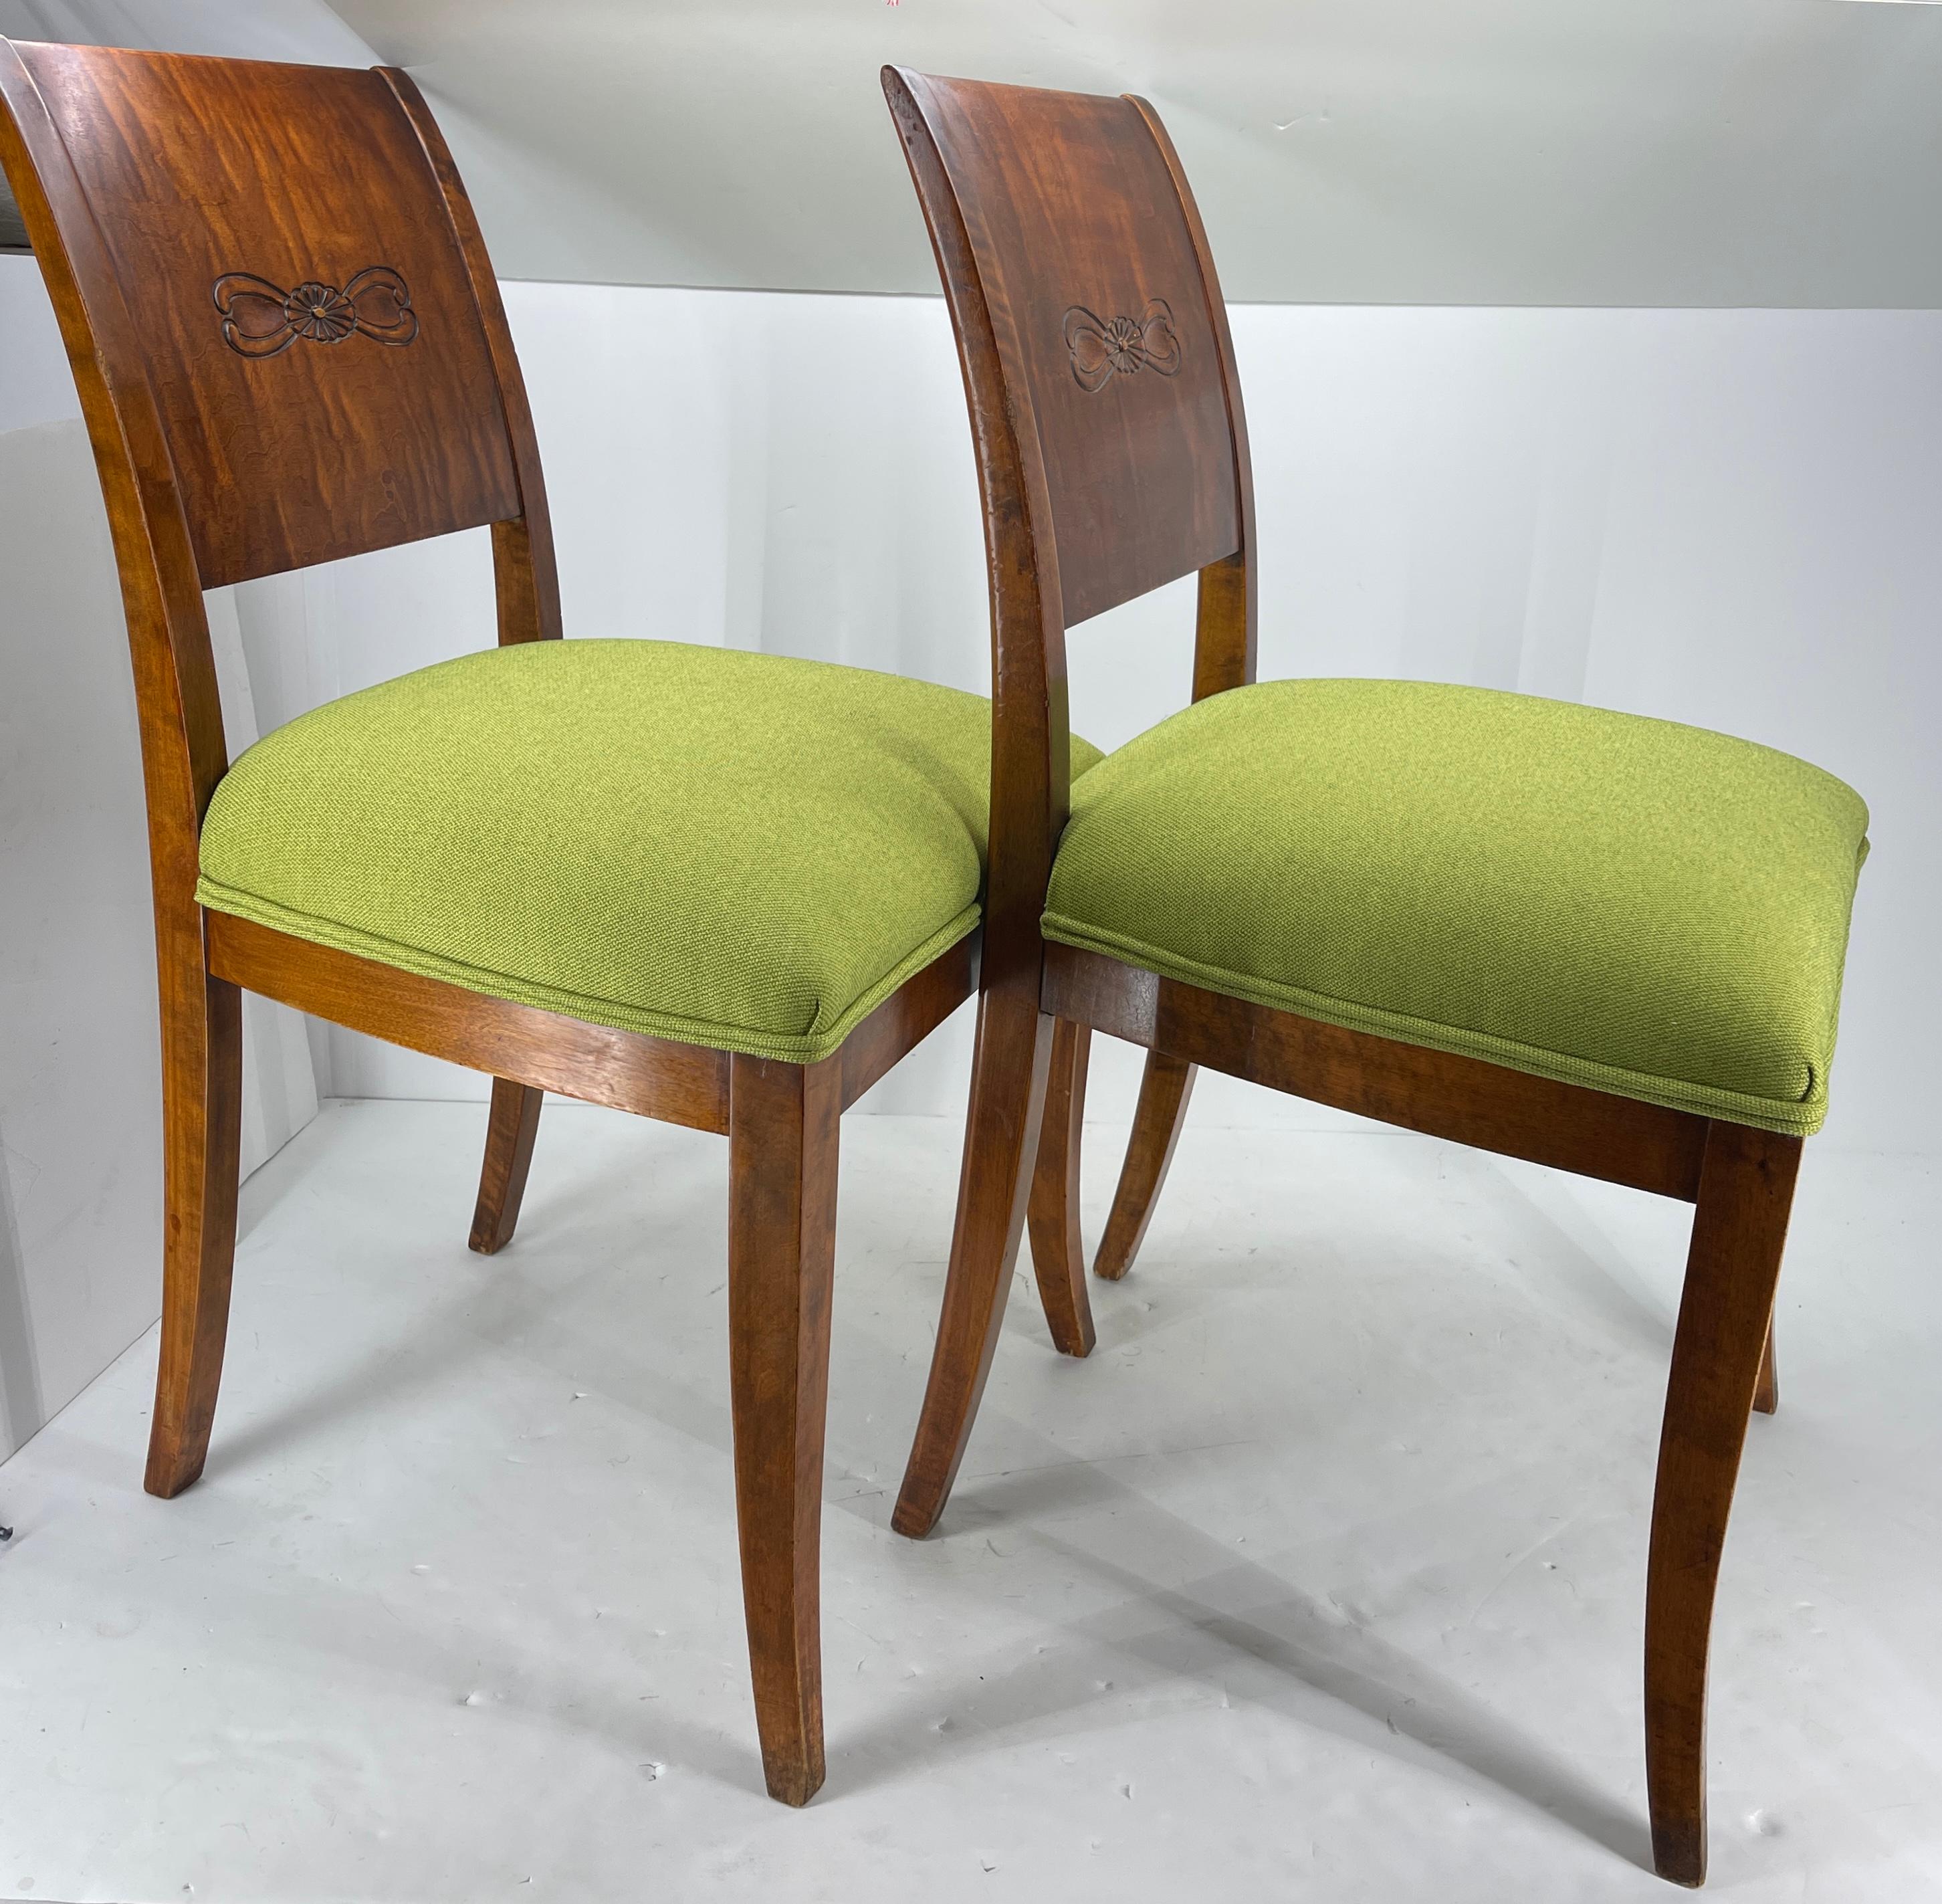 A set of Two Danish Biedermeier side chairs with beautiful carved wood design. This pair of chairs has been newly reupholstered with grass green Knoll fabric. The chairs are as comfortable as they are beautiful. The carving highlights the period and